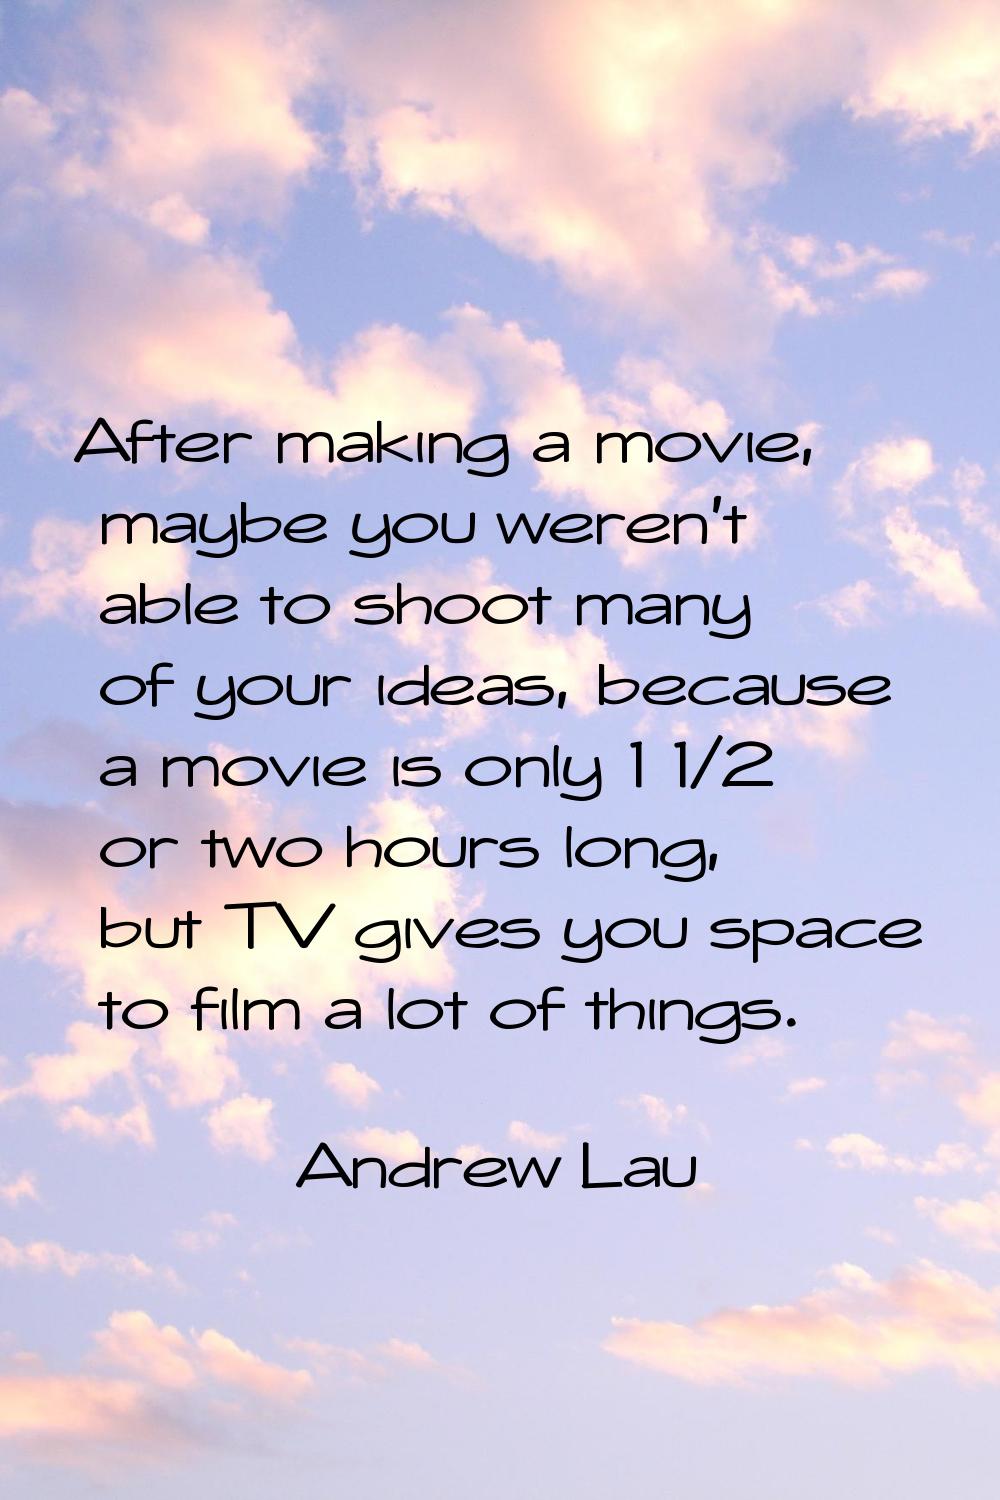 After making a movie, maybe you weren't able to shoot many of your ideas, because a movie is only 1